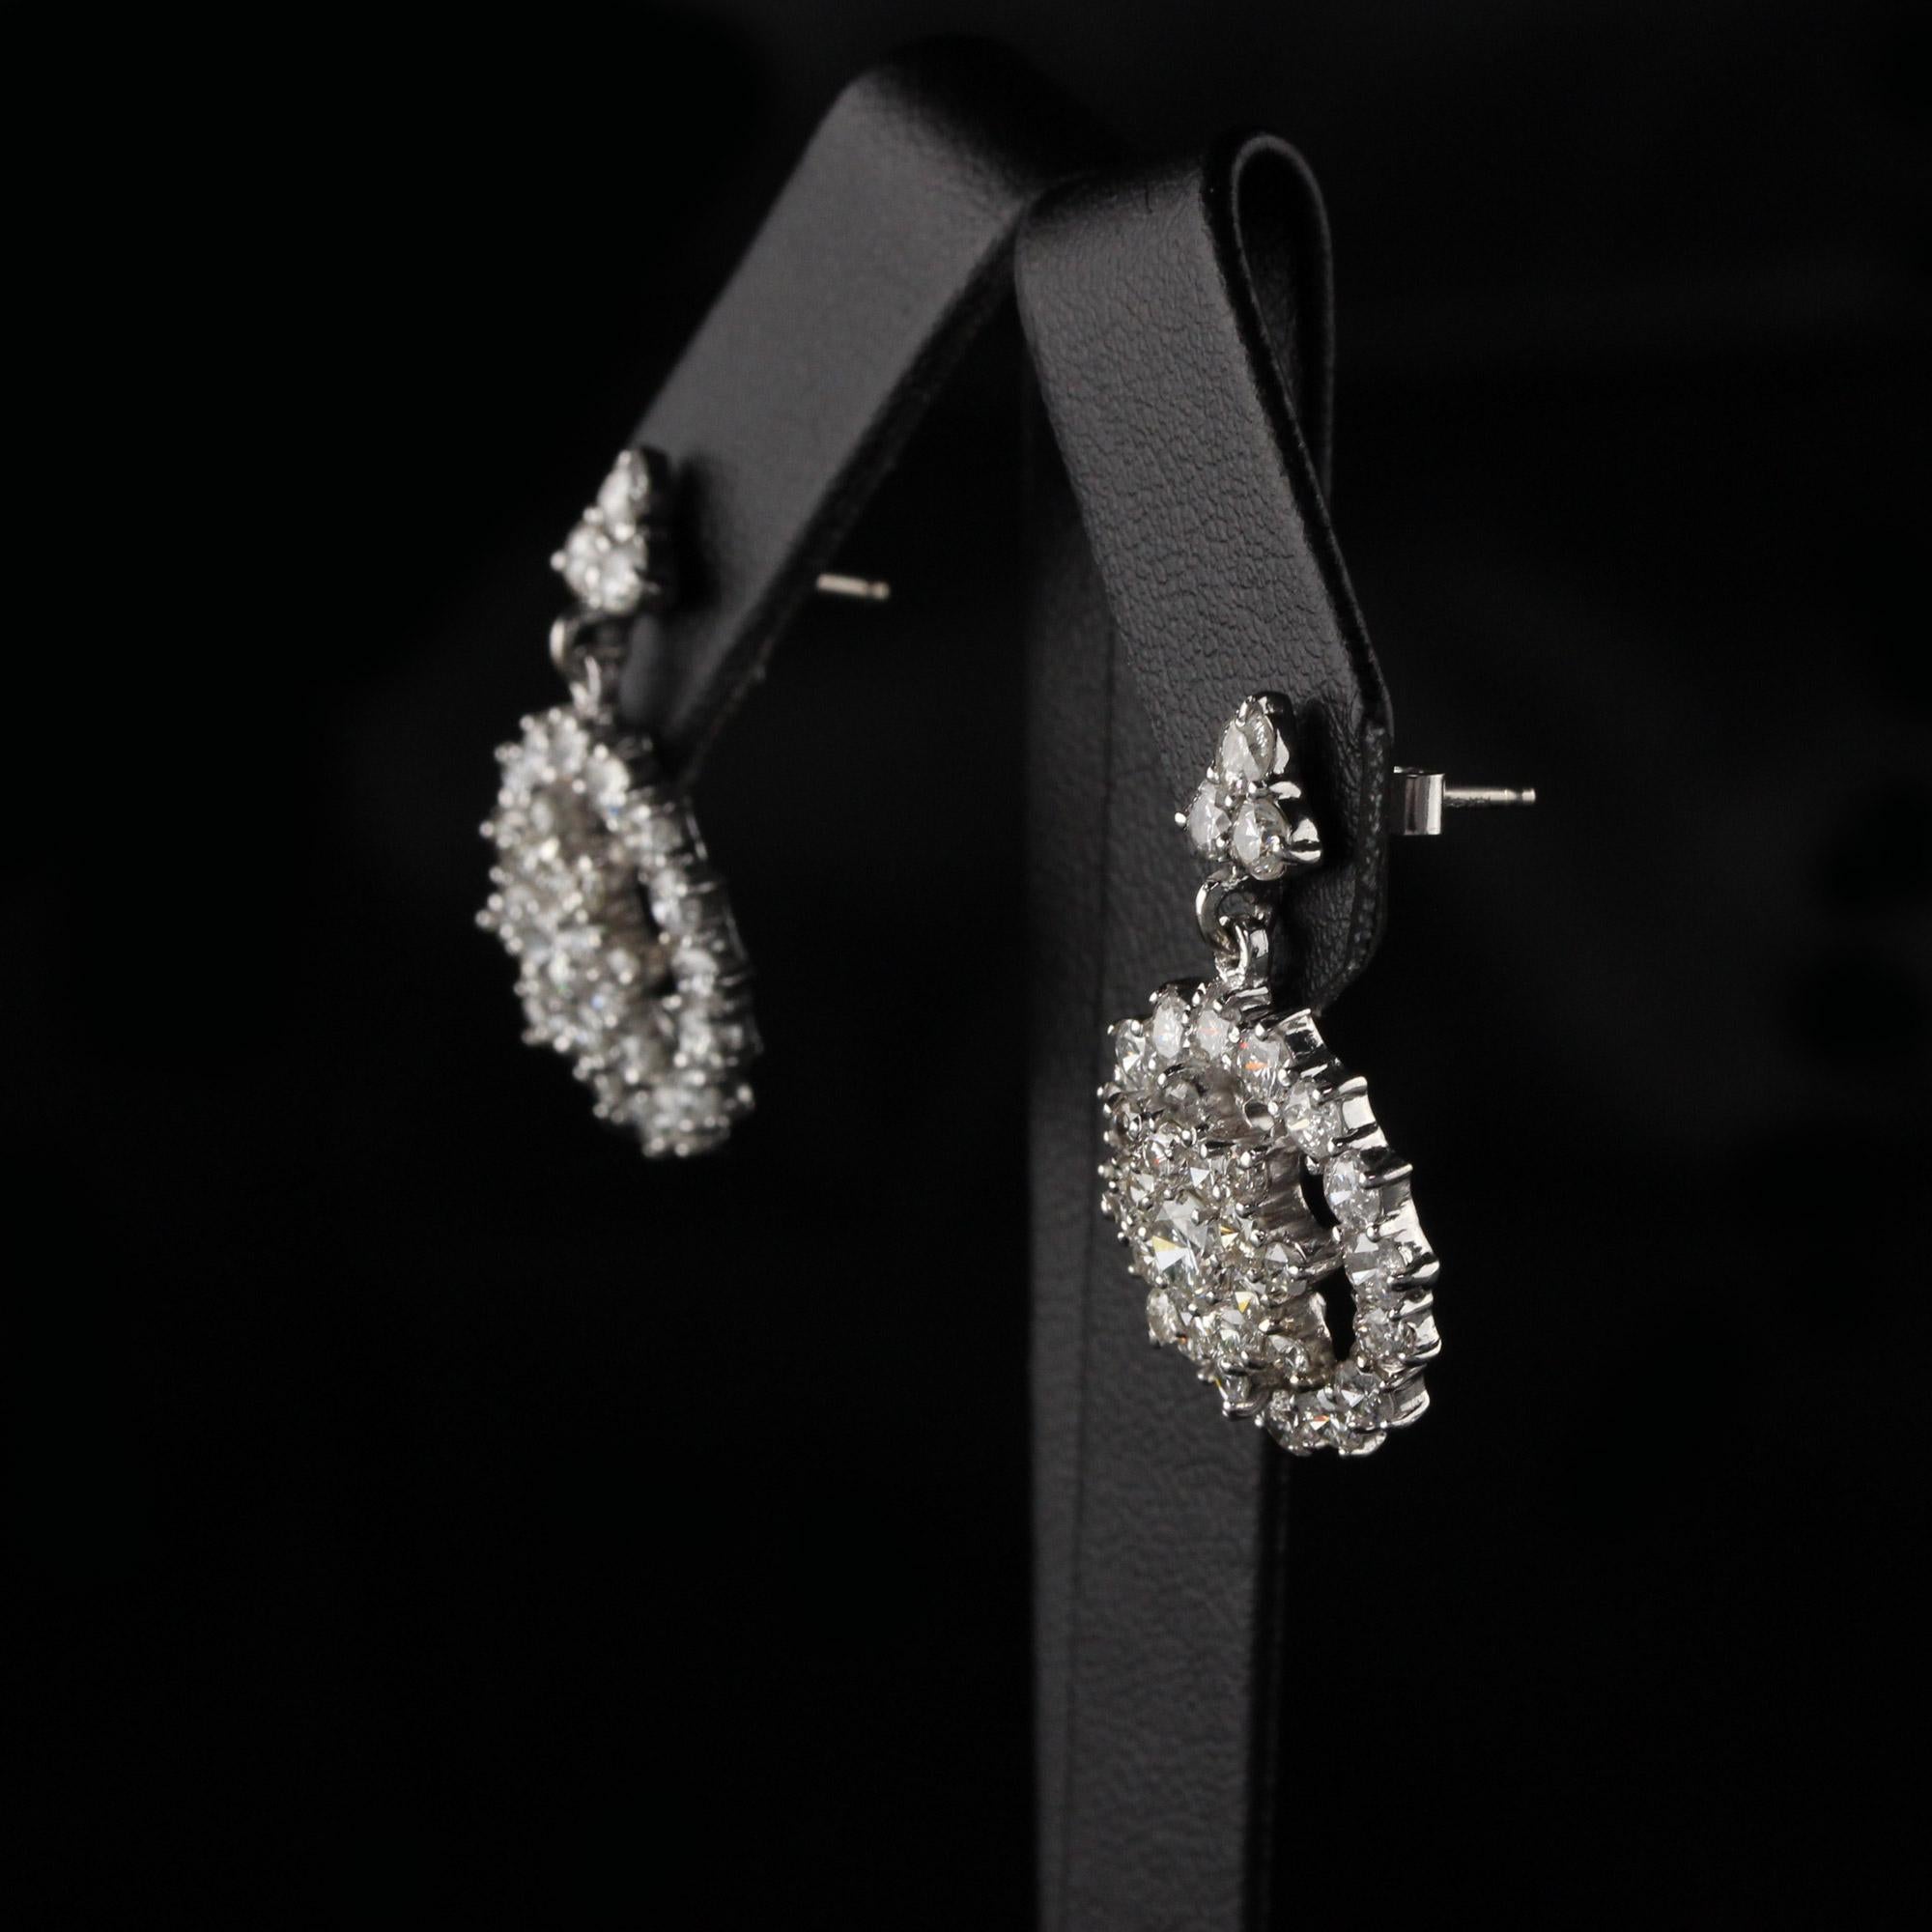 Vintage Estate 14 Karat White Gold Diamond Cluster Earrings In Excellent Condition For Sale In Great Neck, NY